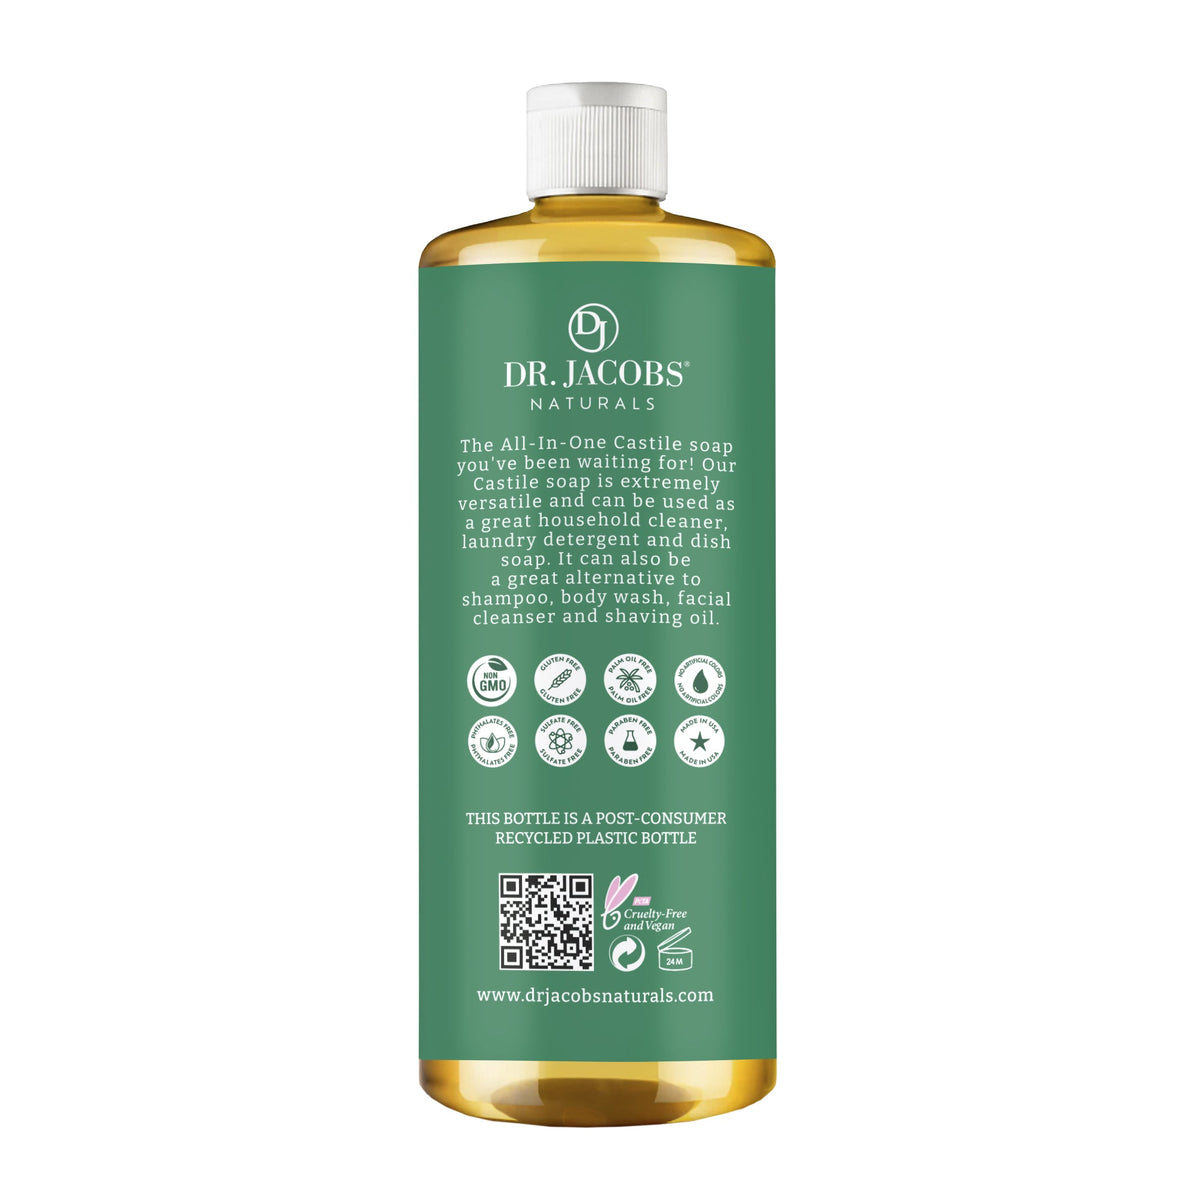 Eucalyptus All in 1 Castile Soap by Dr. Jacobs Naturals